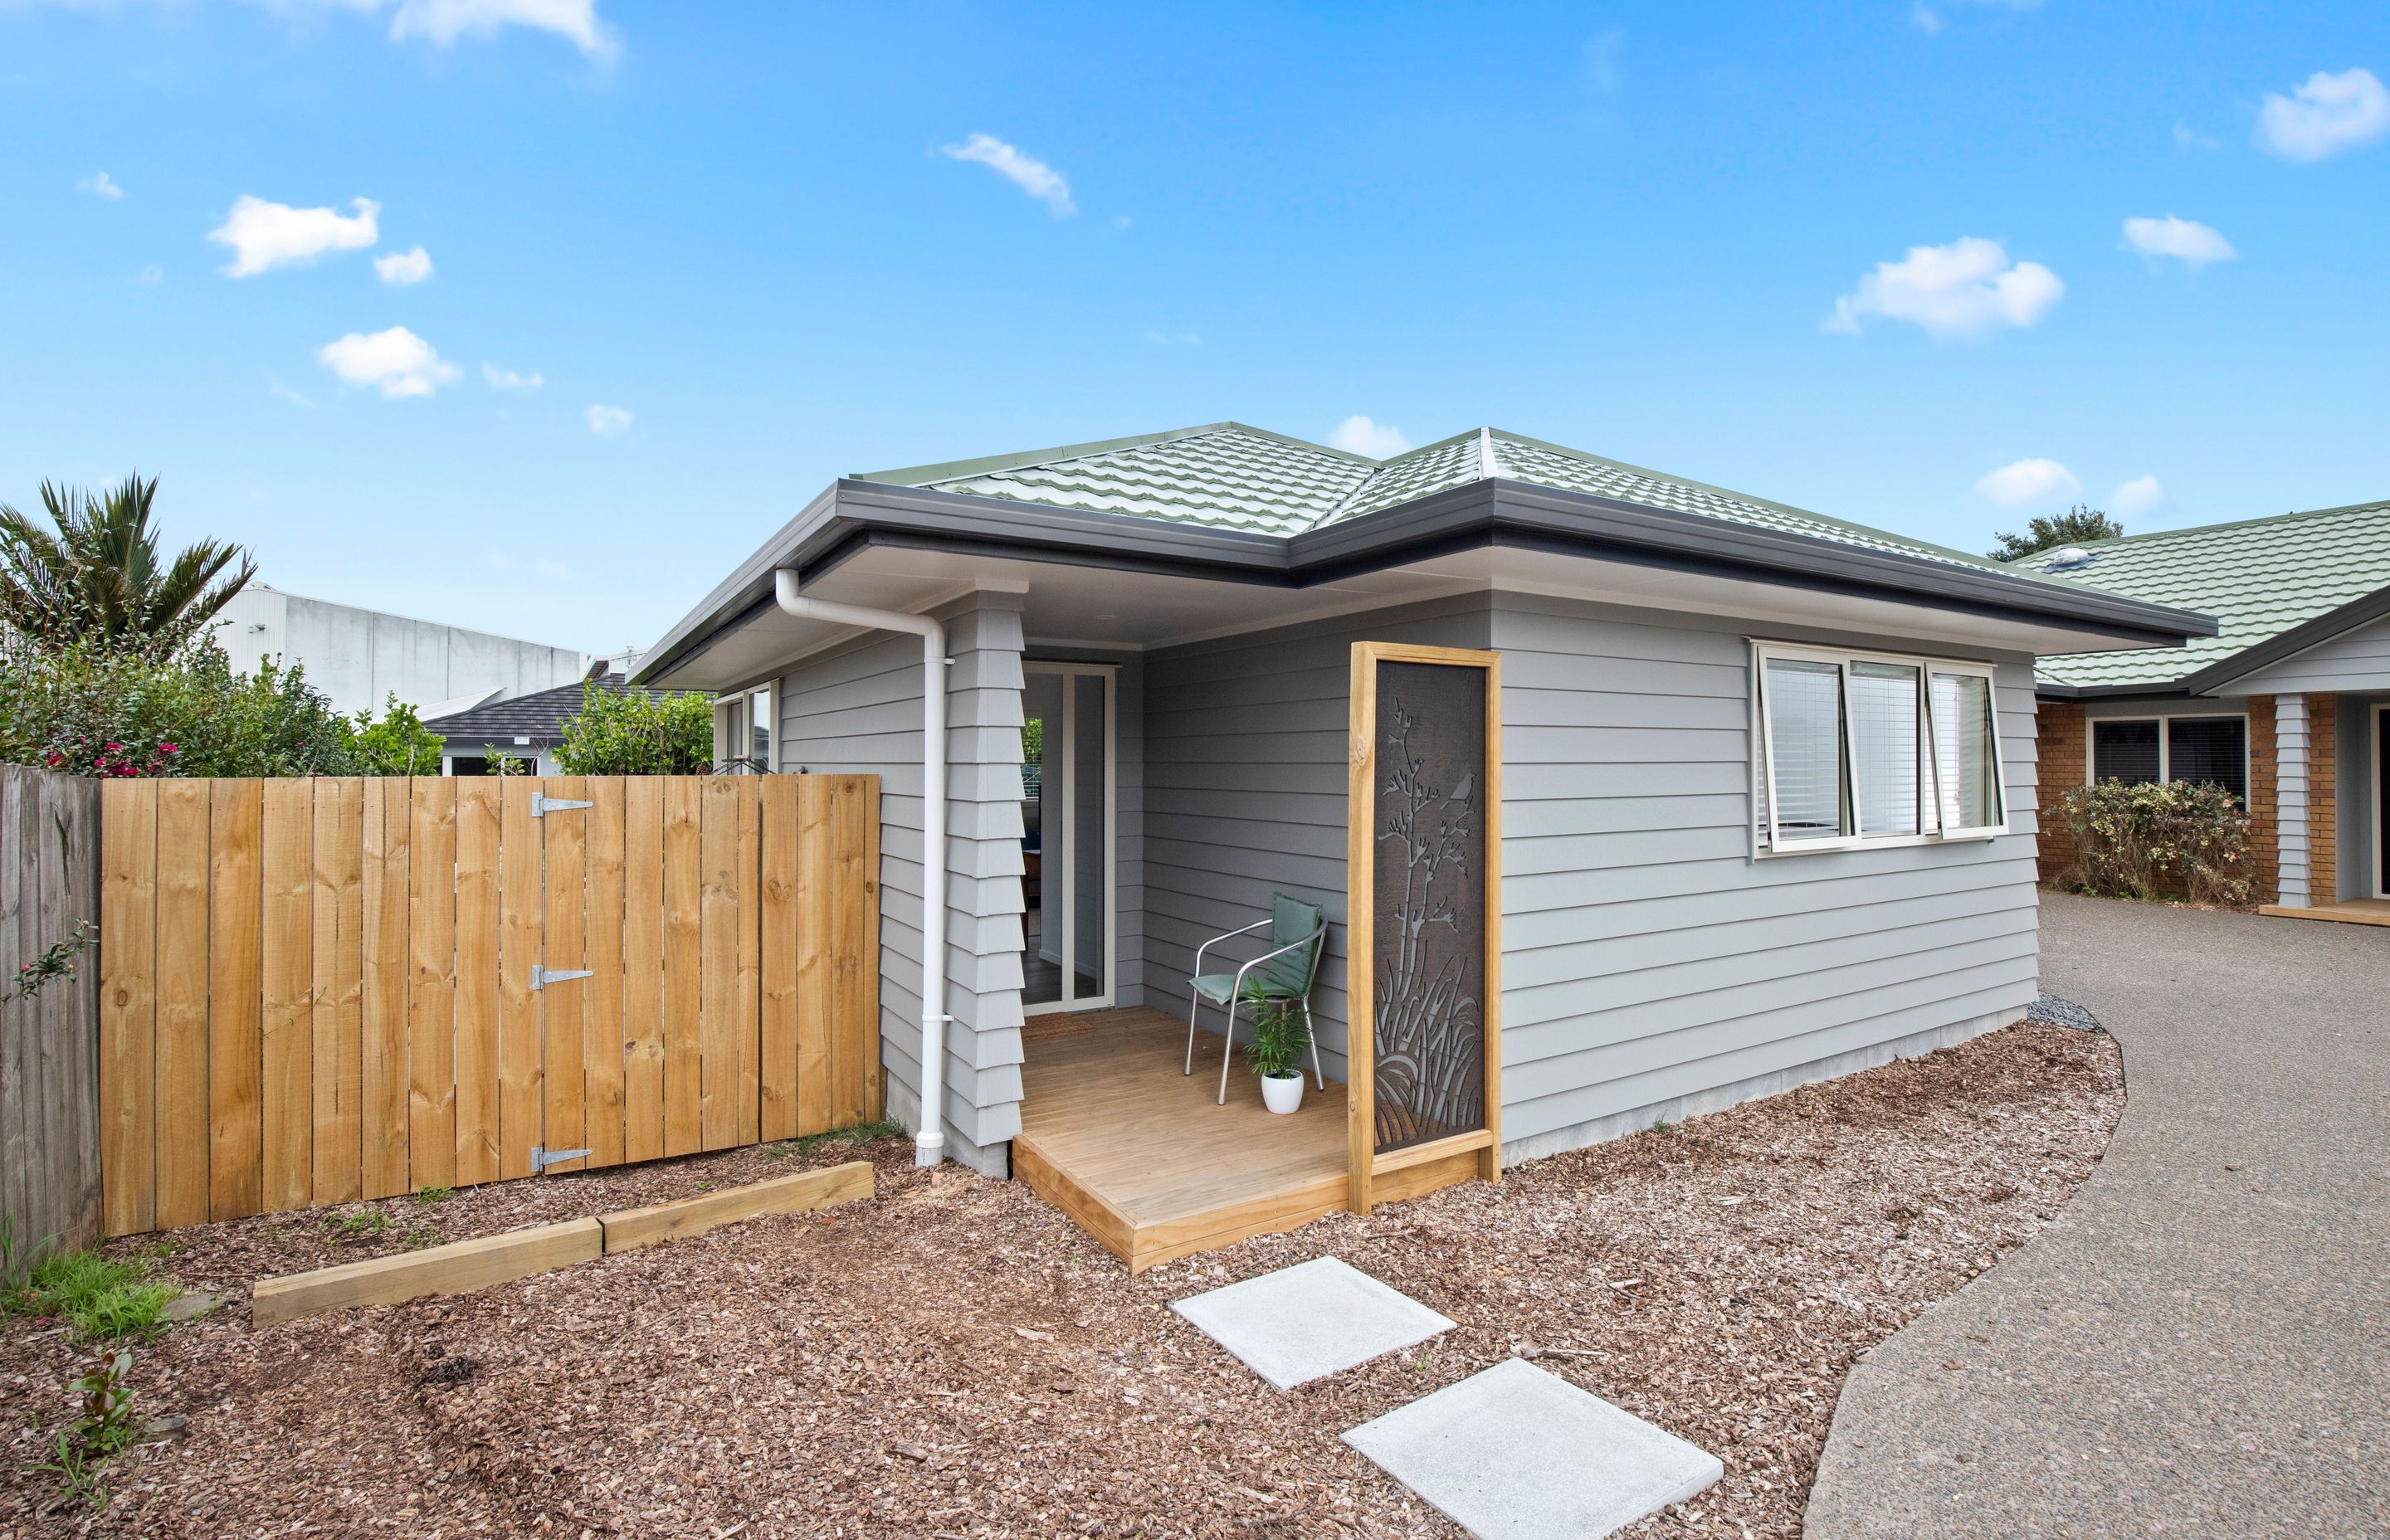 Stylish and Self-Contained Granny Flat